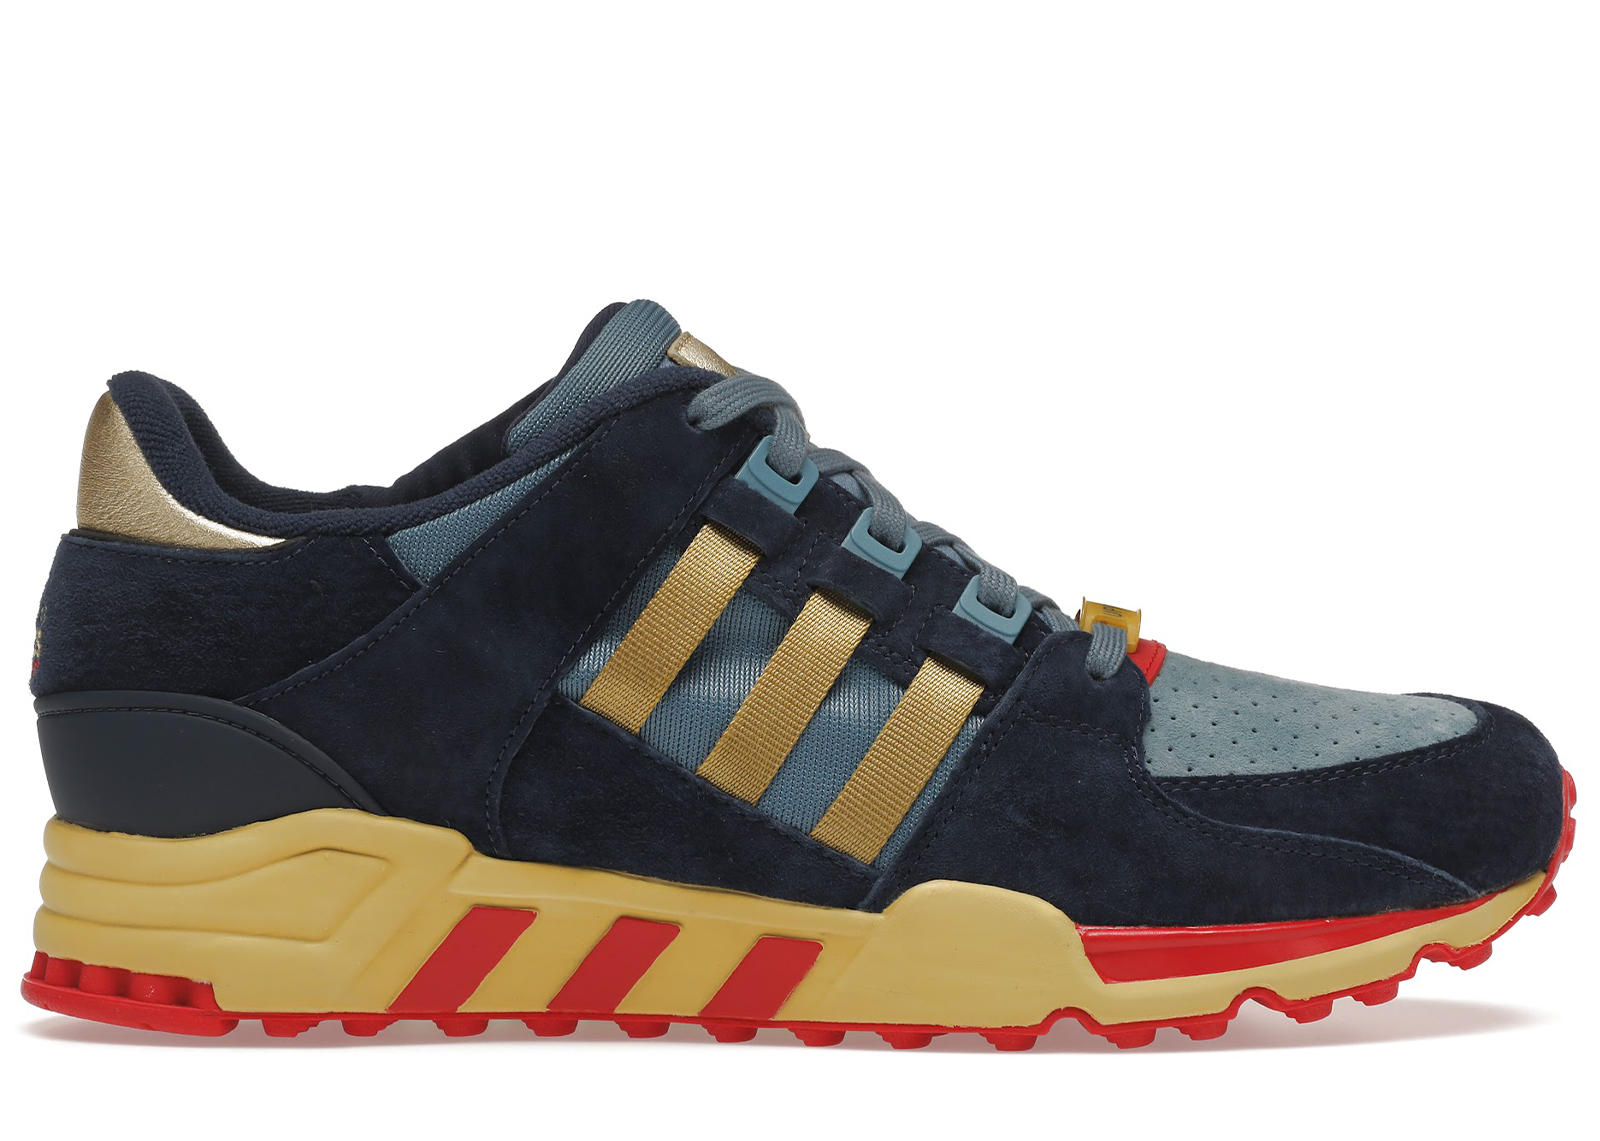 adidas eqt x packer shoes support 93 sl80